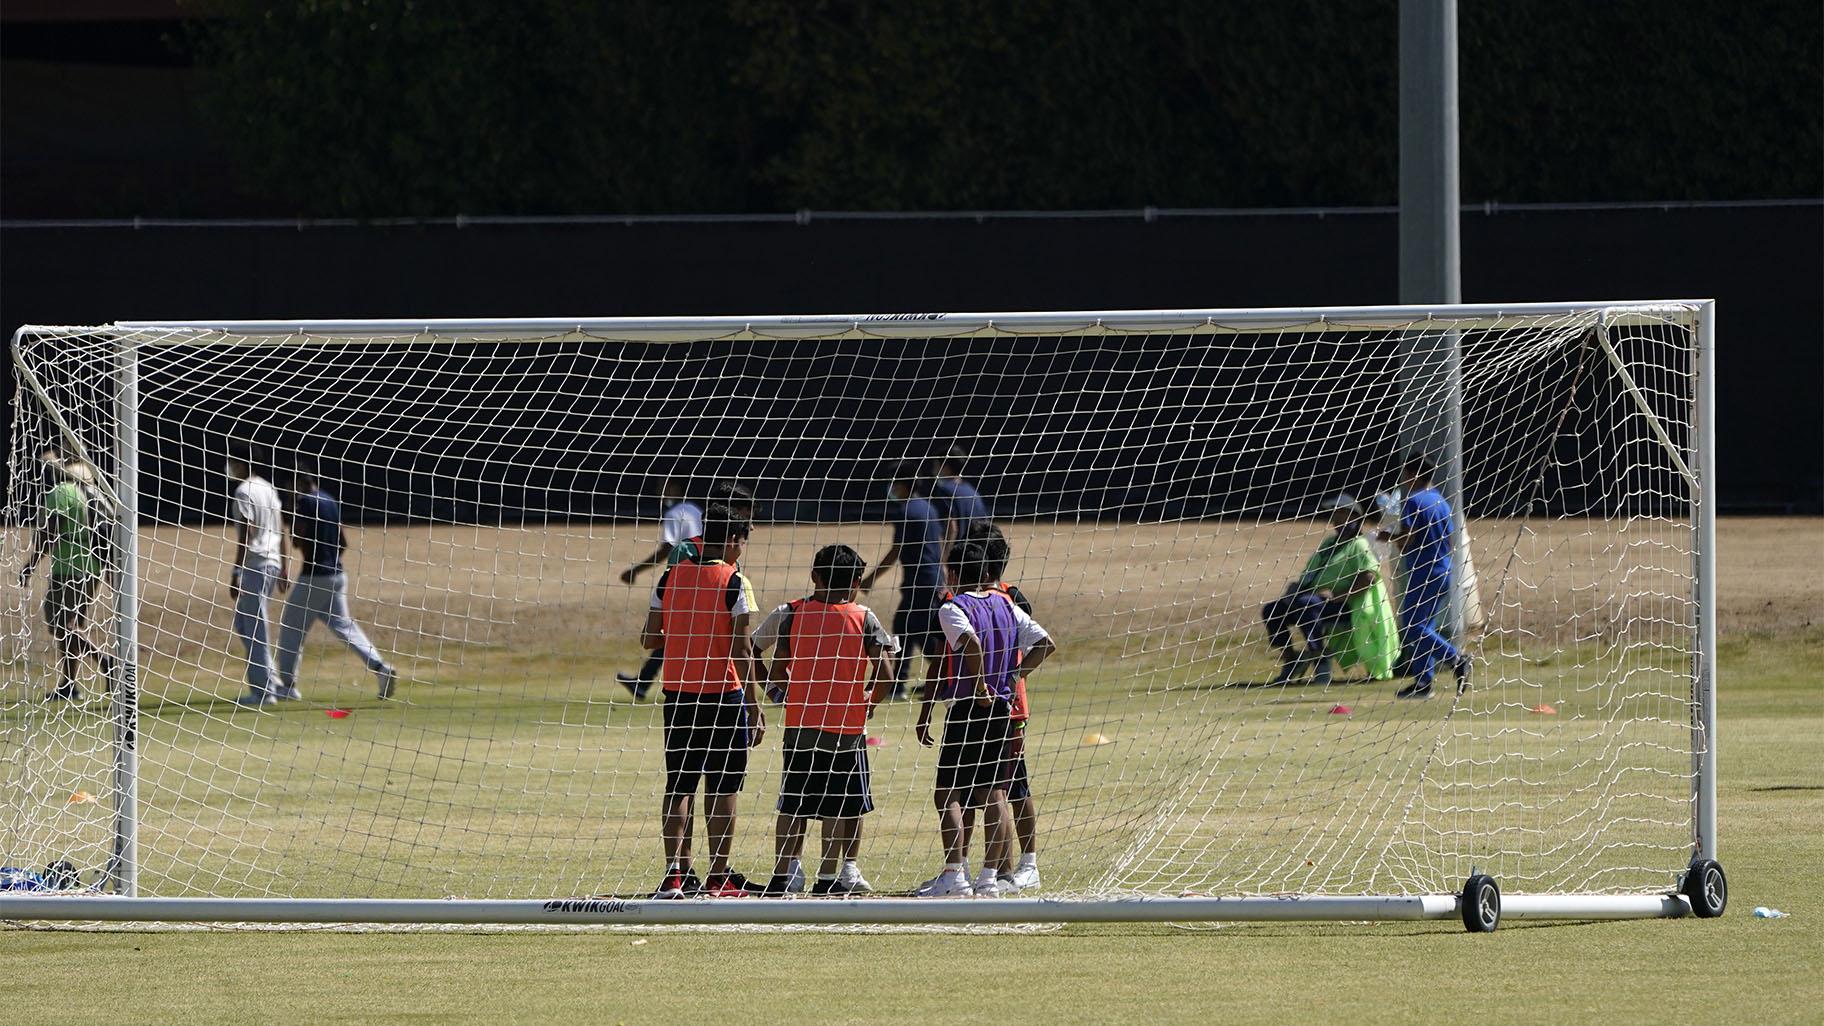 Children play soccer at an emergency shelter for migrant children Friday, July 2, 2021, in Pomona, Calif. (AP Photo / Marcio Jose Sanchez, Pool)